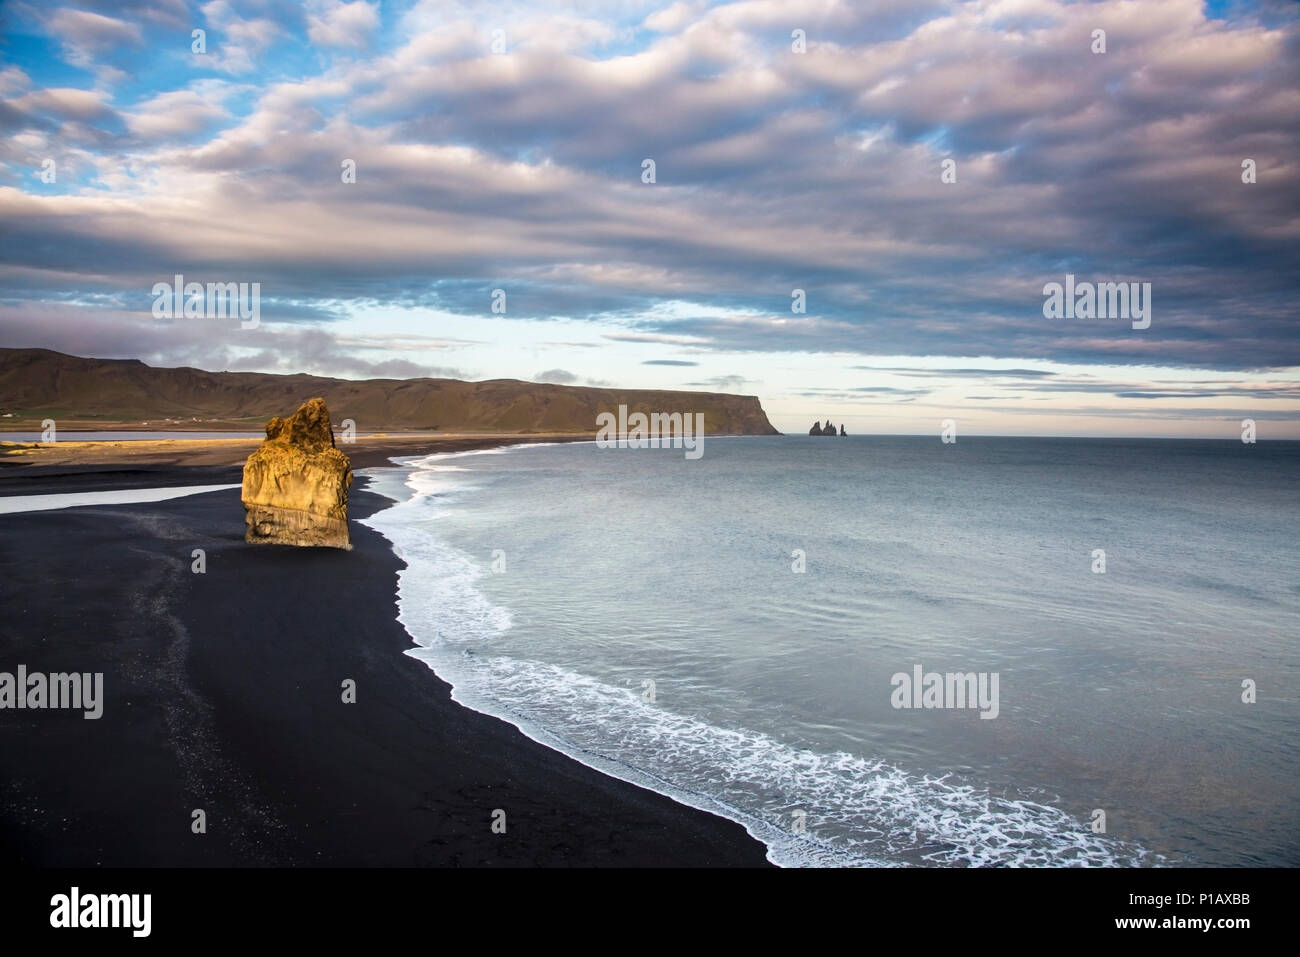 Black sand beach and tranquil, remote ocean, Dyrholaey, Iceland Stock Photo